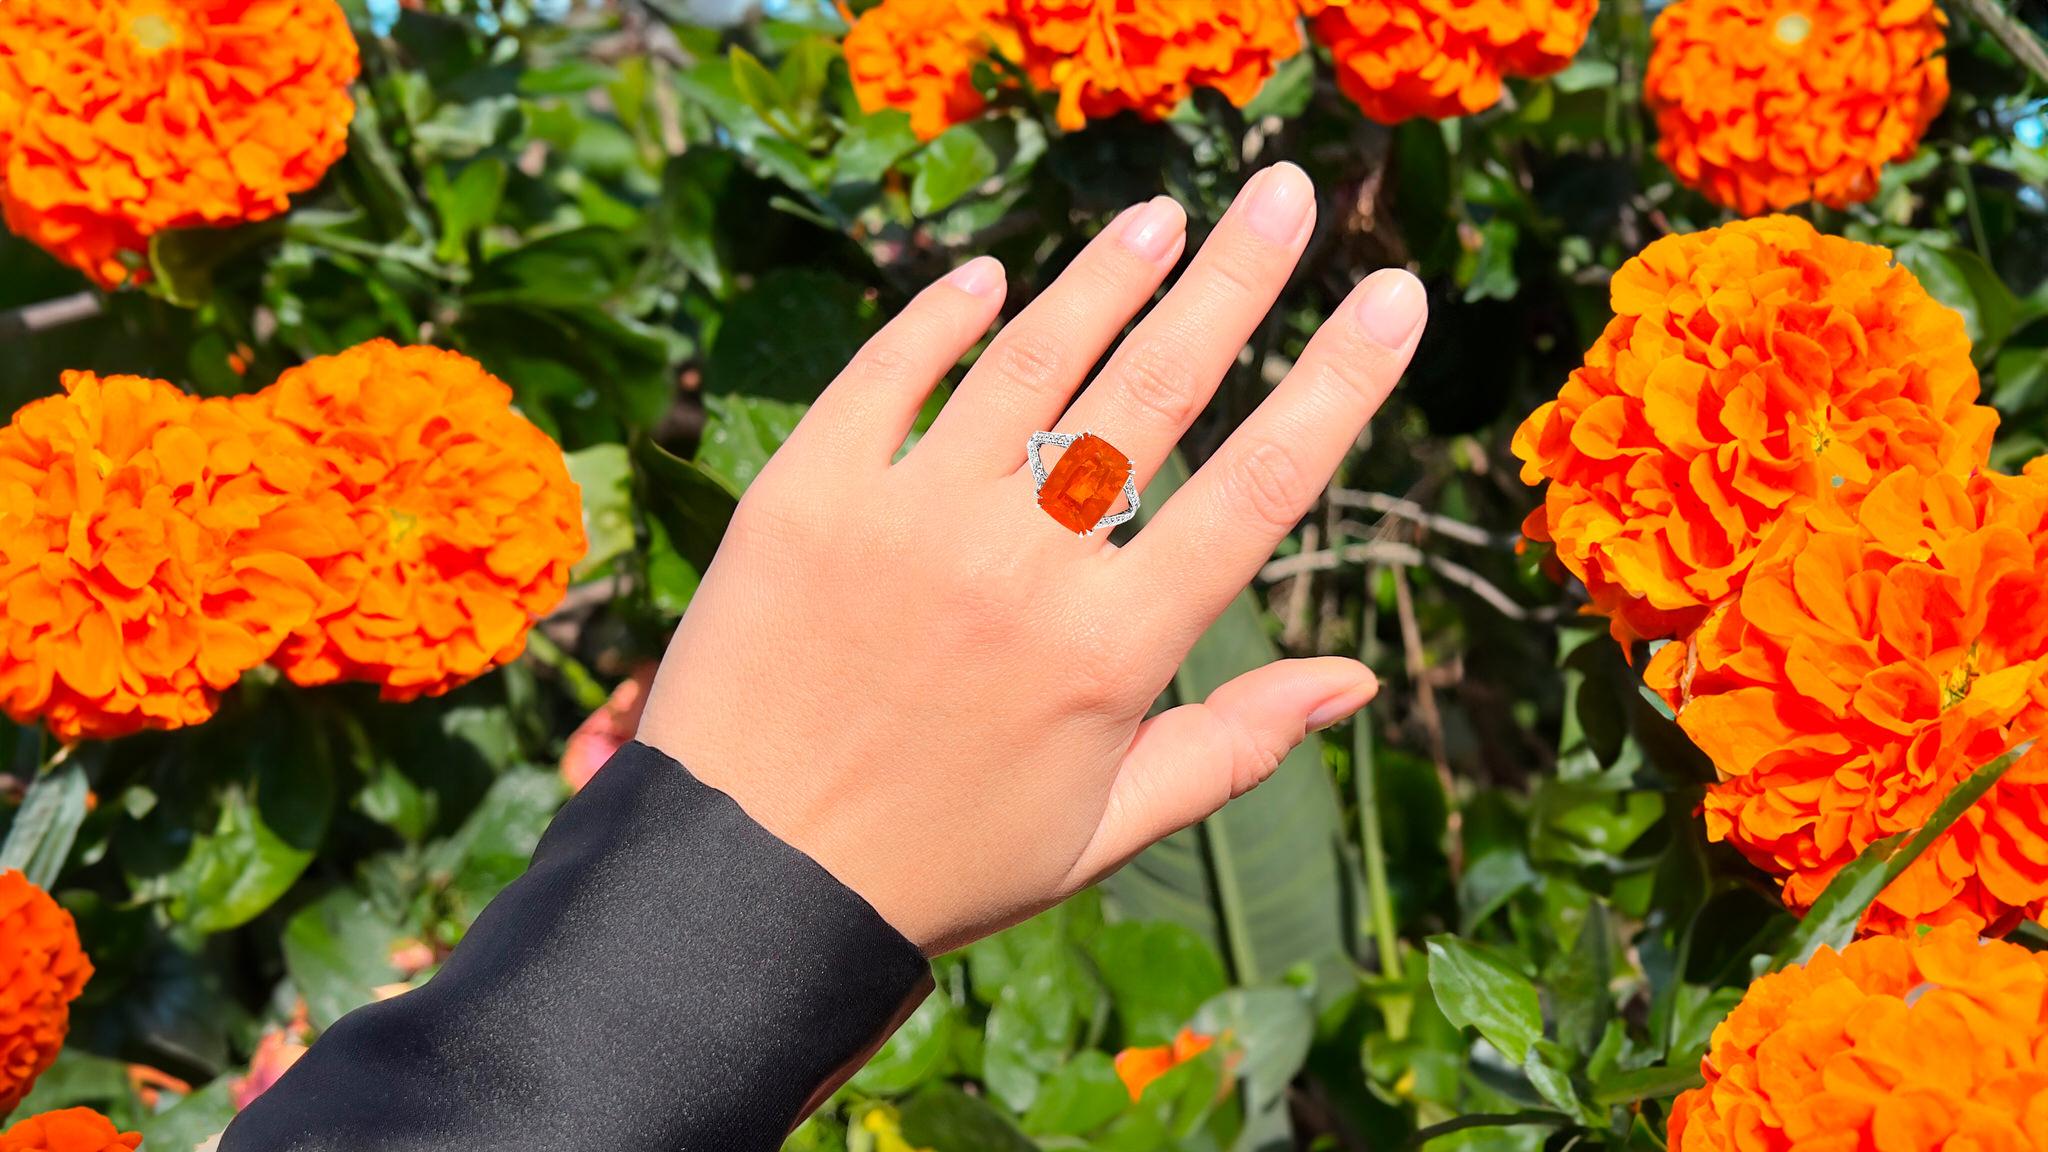 It comes with the Gemological Appraisal by GIA GG/AJP
All Gemstones are Natural
Fire Opal = 5.92 Carat
30 Diamonds = 0.54 Carats
Metal: 14K White Gold
Ring Size: 6.5* US
*It can be resized complimentary